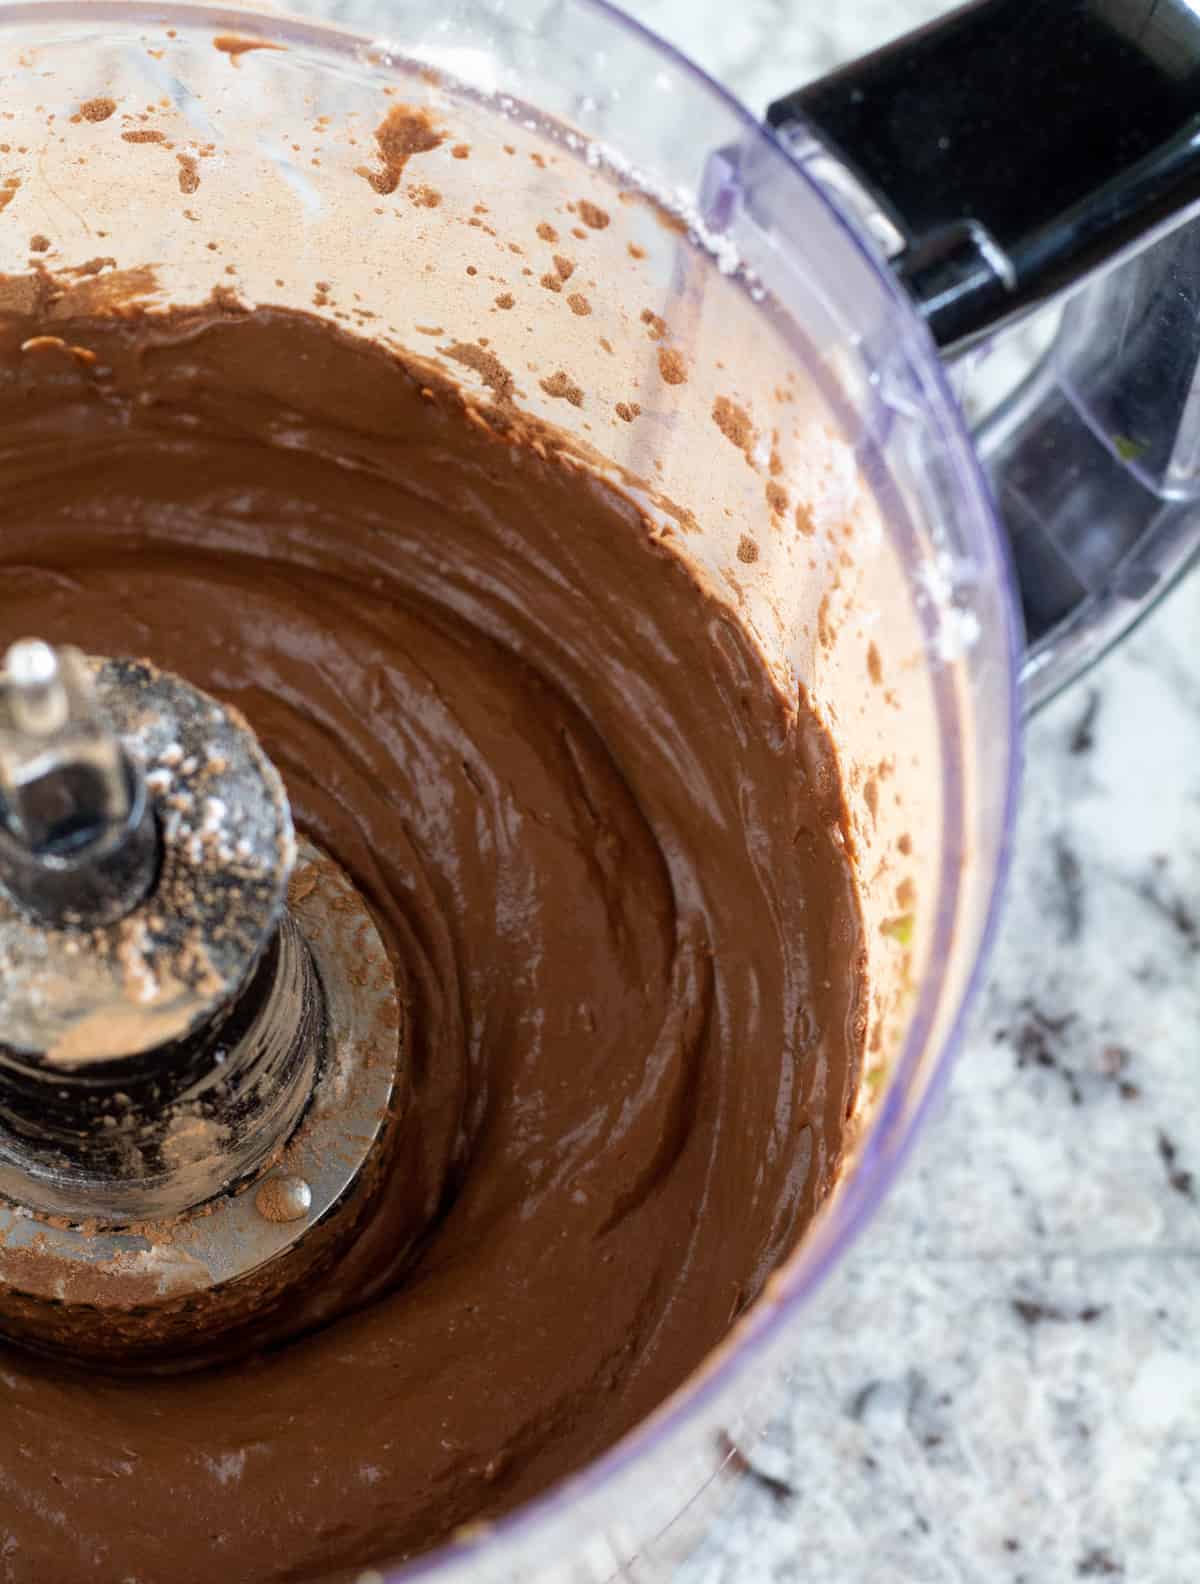 Creamy chocolate pudding in food processor